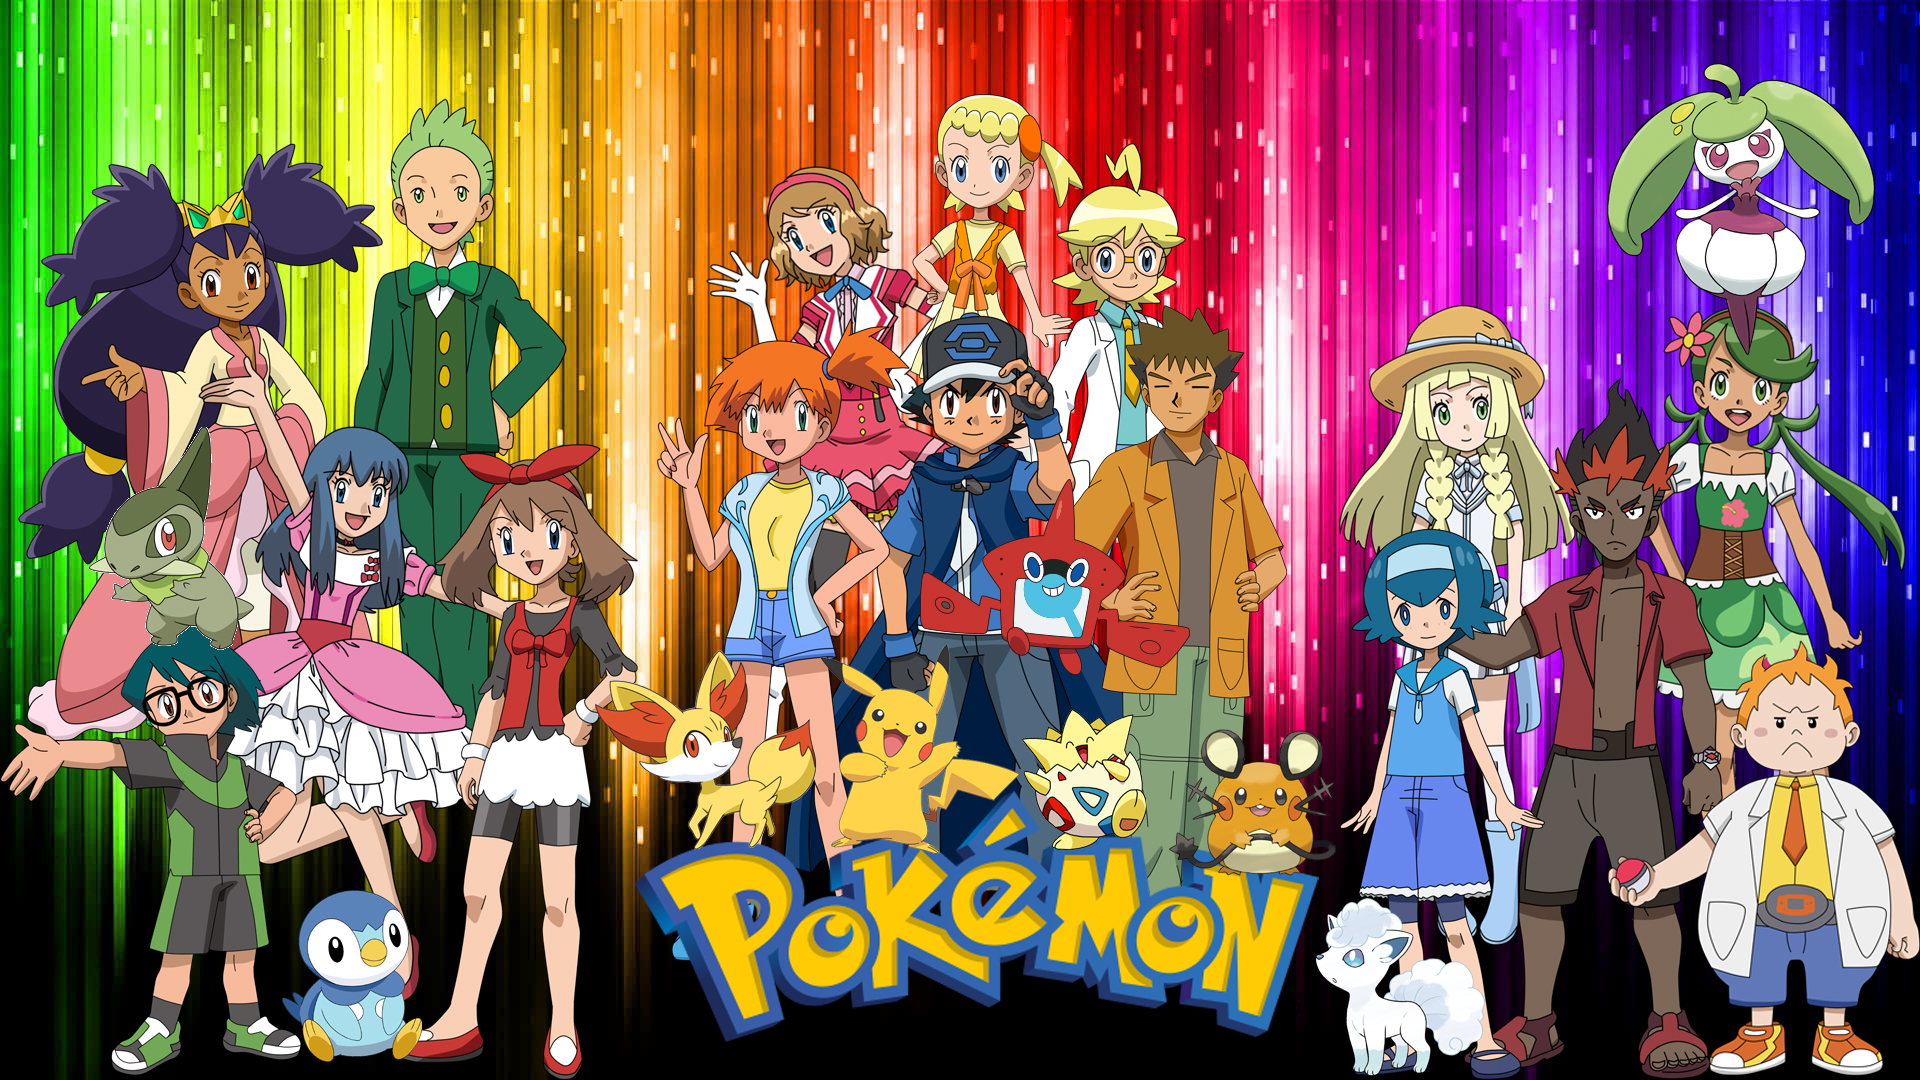 Pokemon Wallpaper with All Characters. by StuAnimeArt on DeviantArt